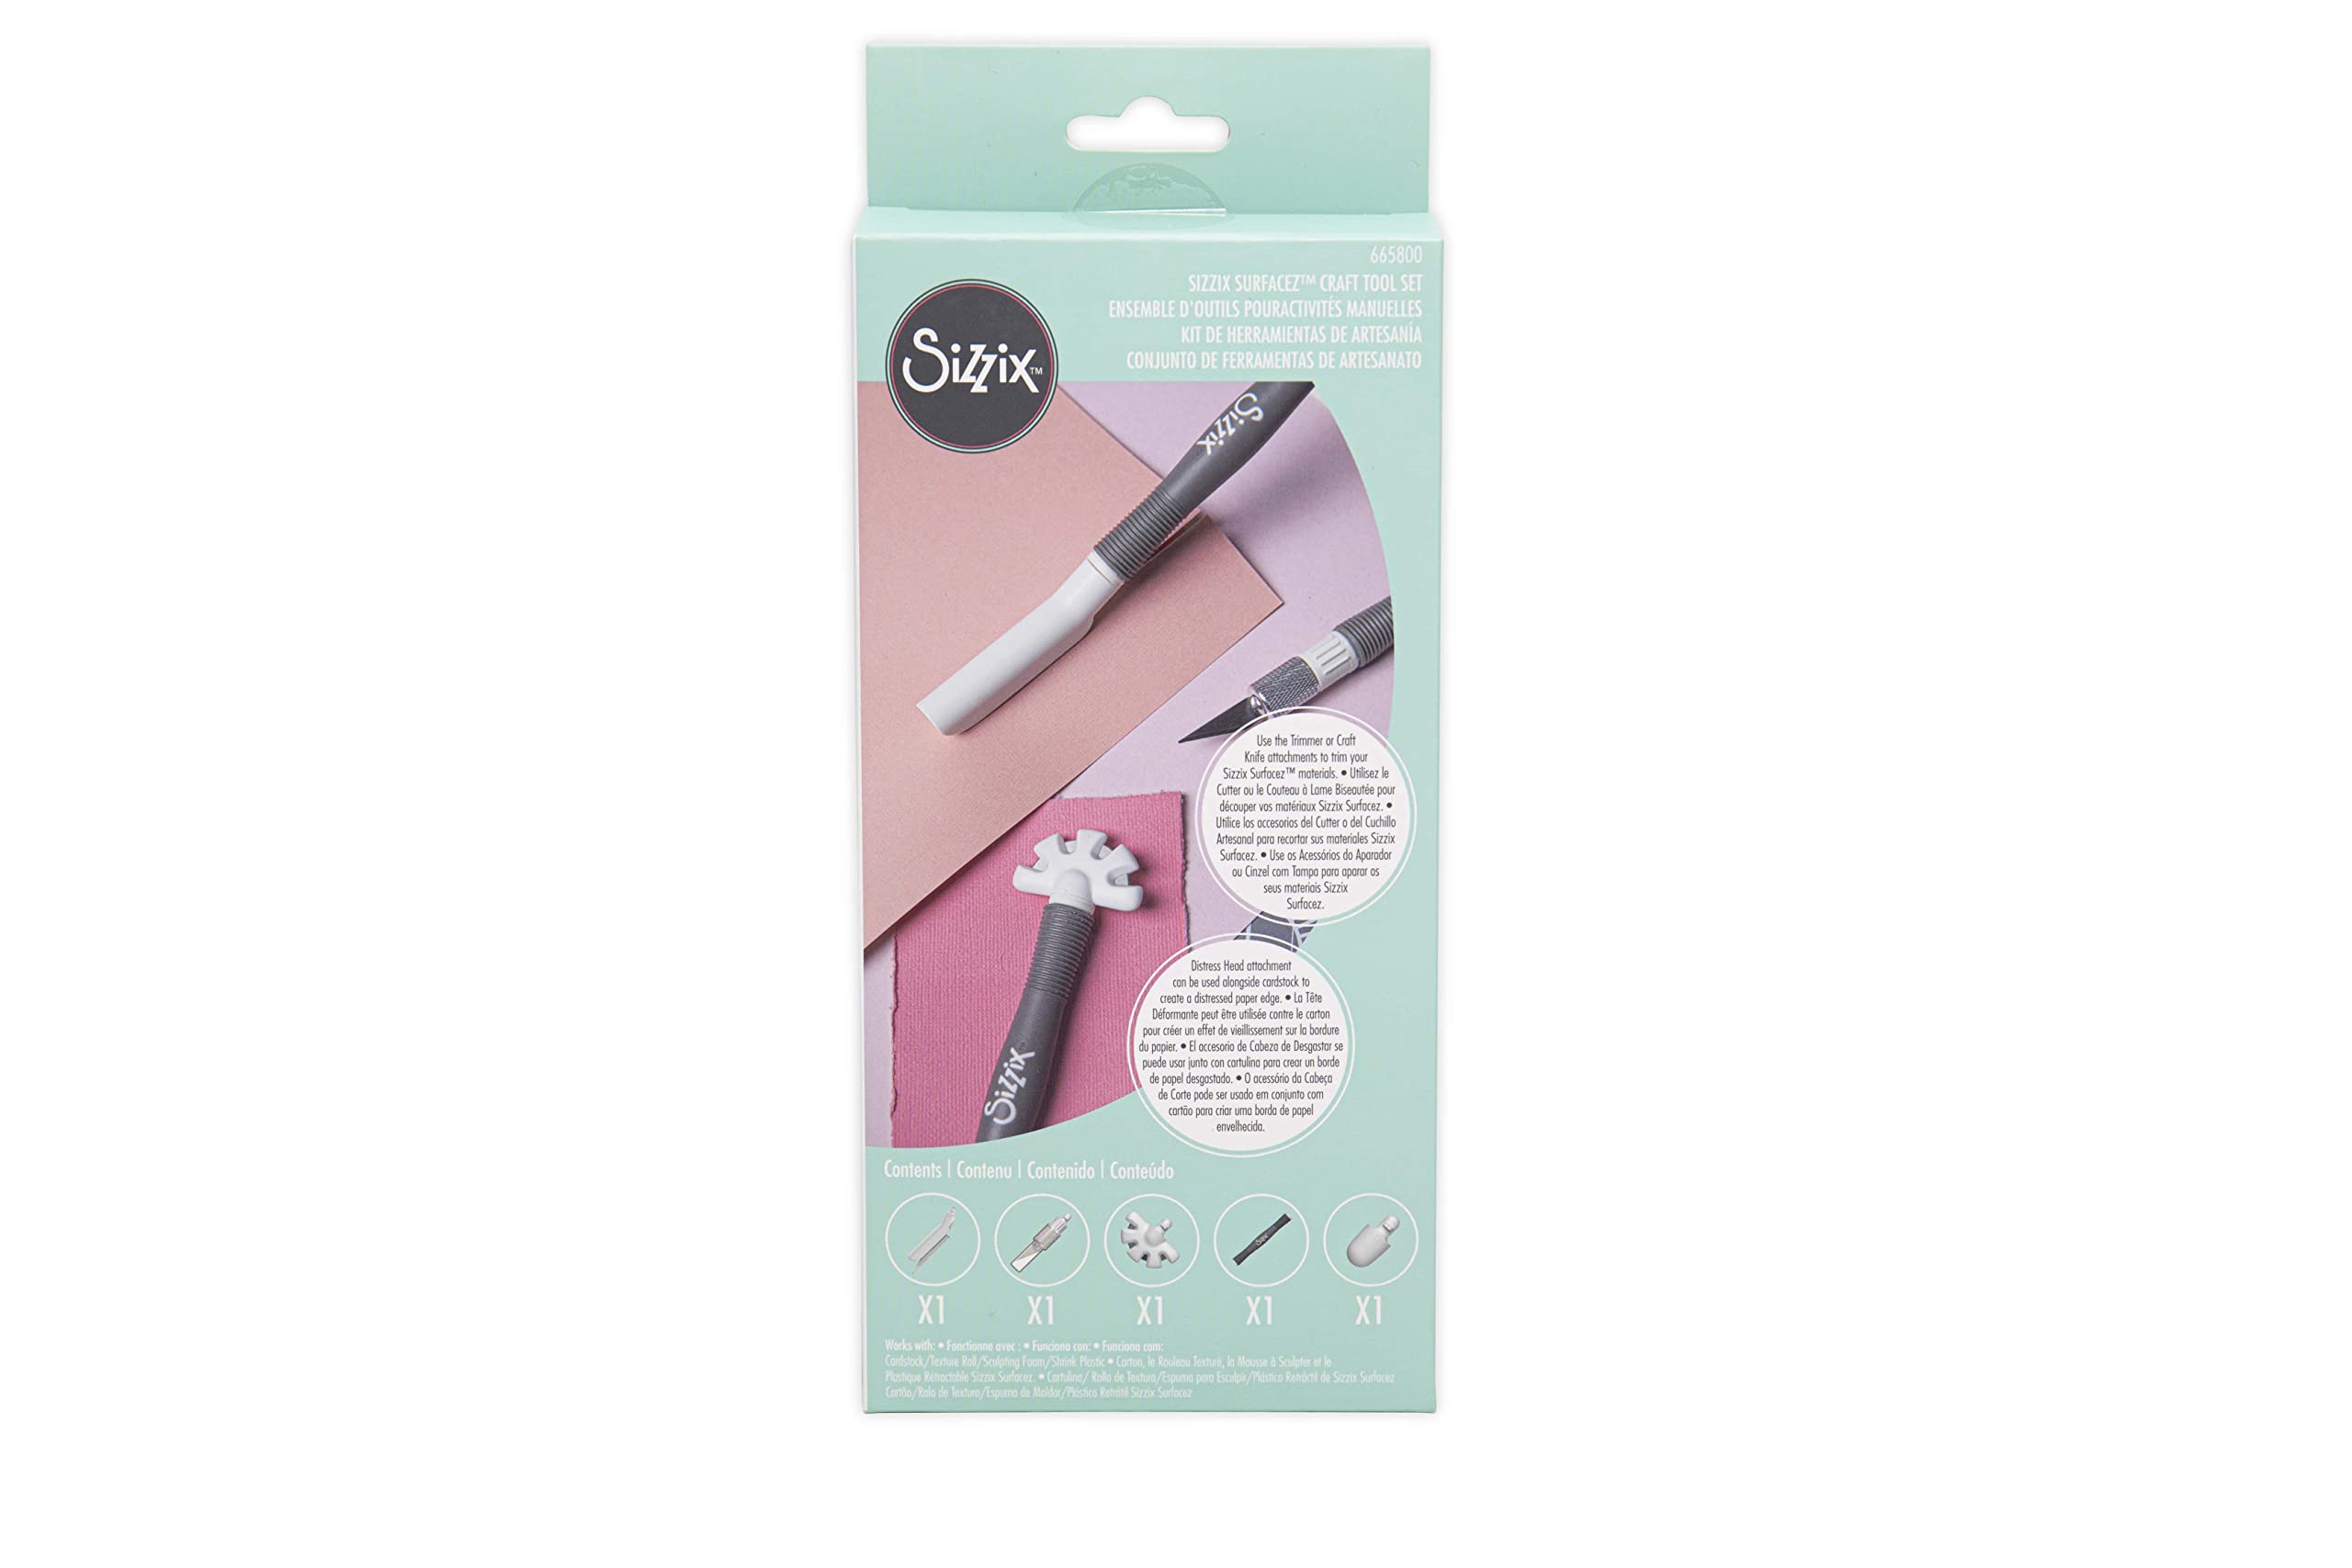 Sizzix Craft Knife, Trimmer & Distress Tool Set | Perfect for Papercraft, Cardmaking, Scrapbooking, Detailed Cutting & Creating Texture, White/Grey